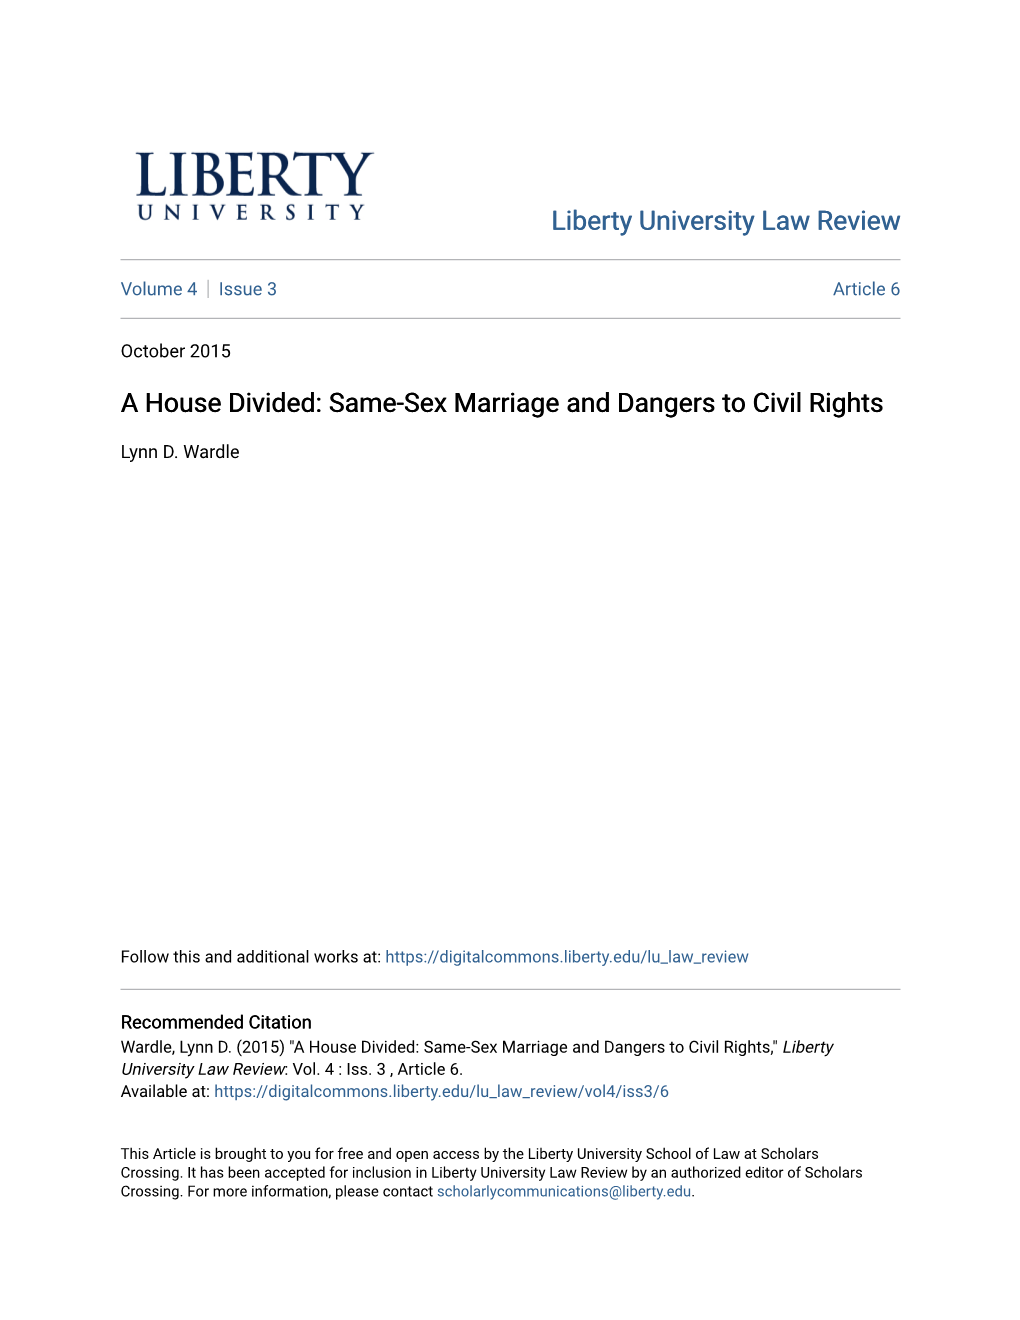 A House Divided: Same-Sex Marriage and Dangers to Civil Rights